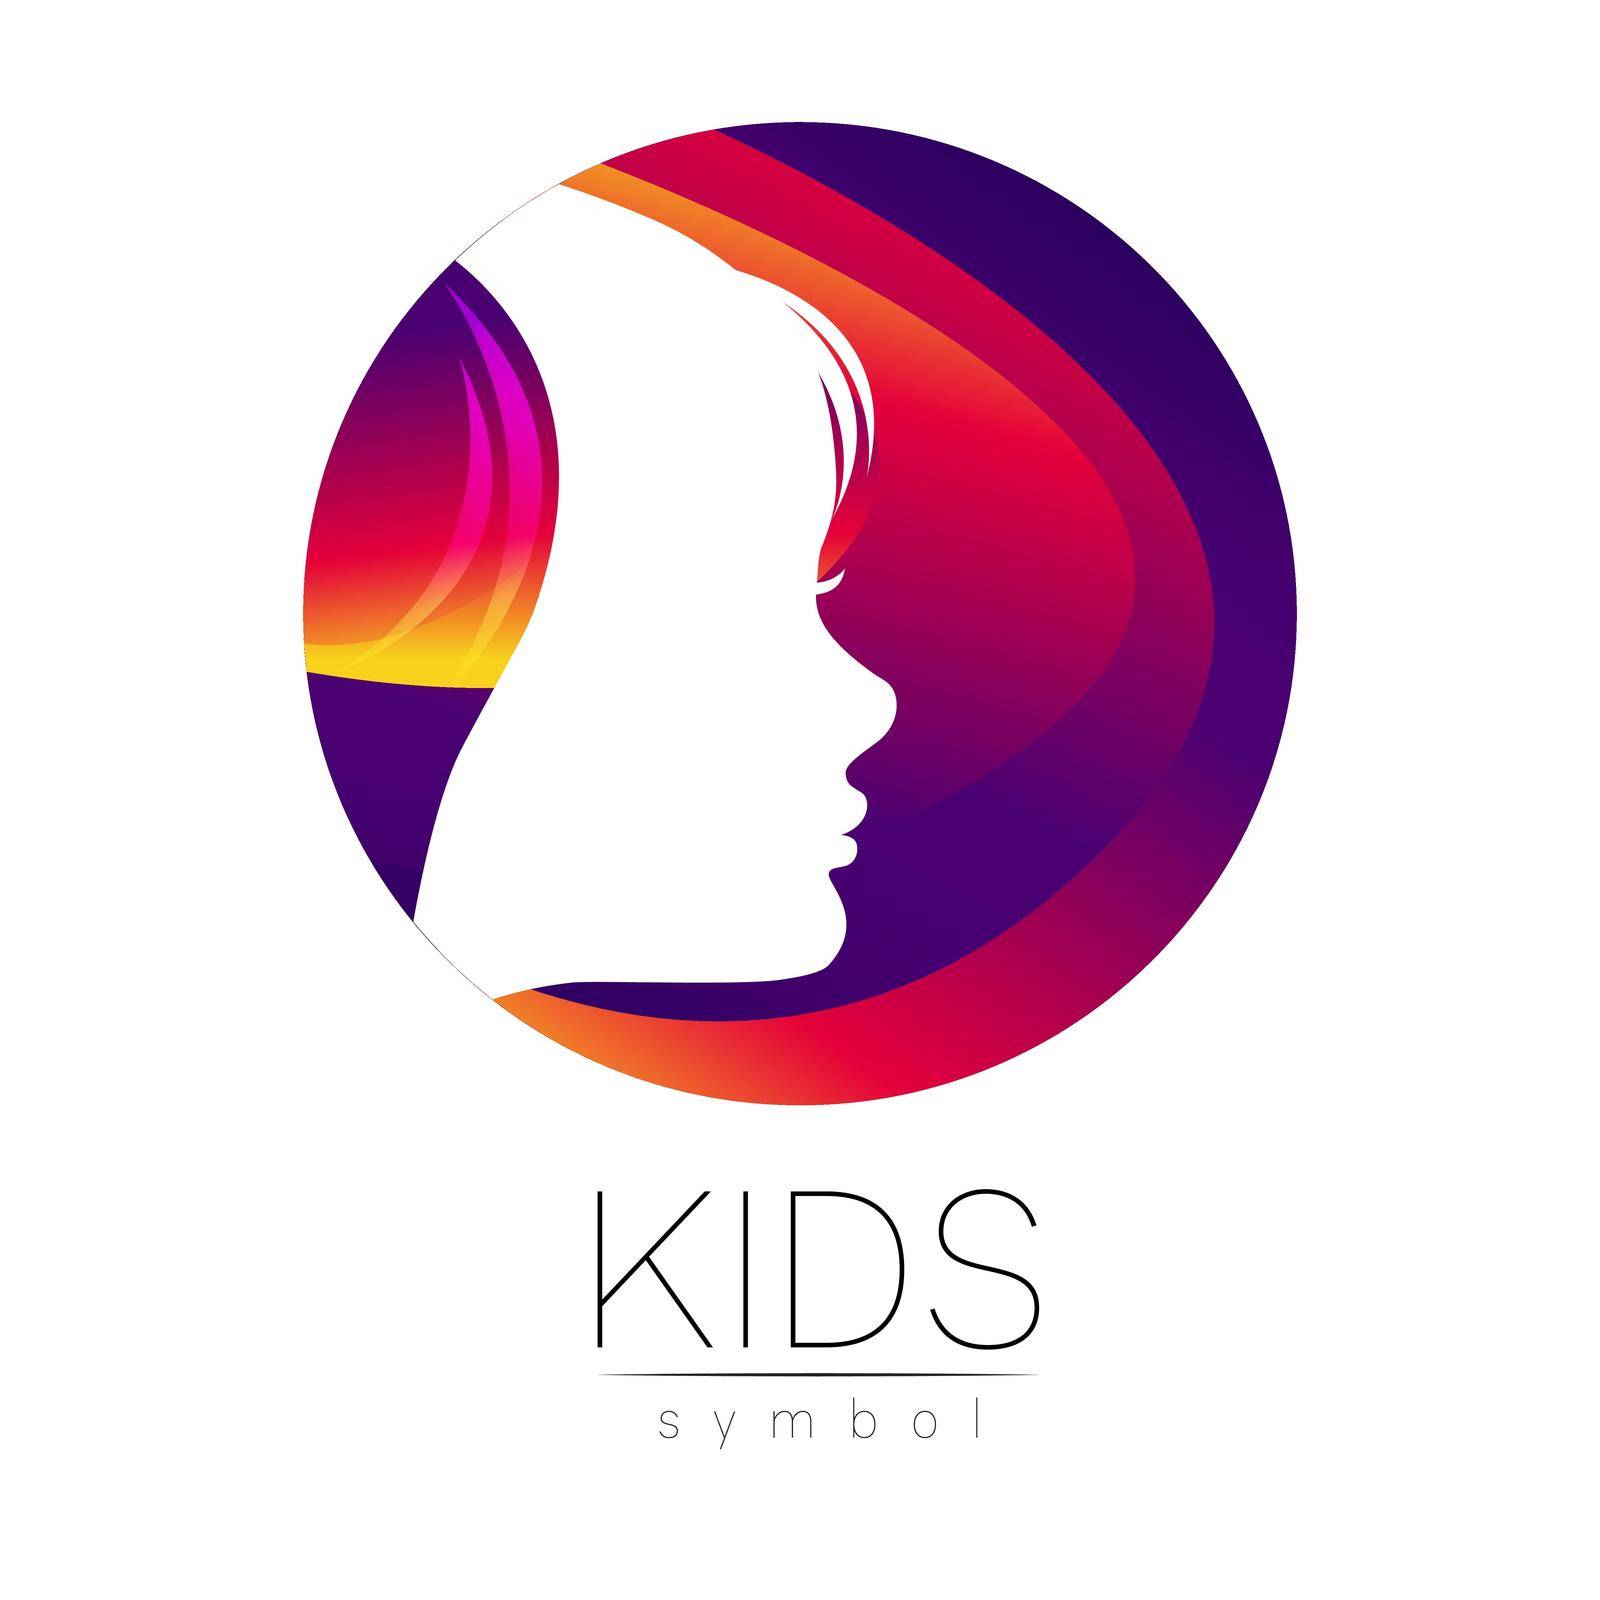 Child Girl Vector logotype in violet circle. Silhouette profile human head. Concept logo for people, children, autism, kids, therapy, clinic, education. Template symbol design by DesignAB